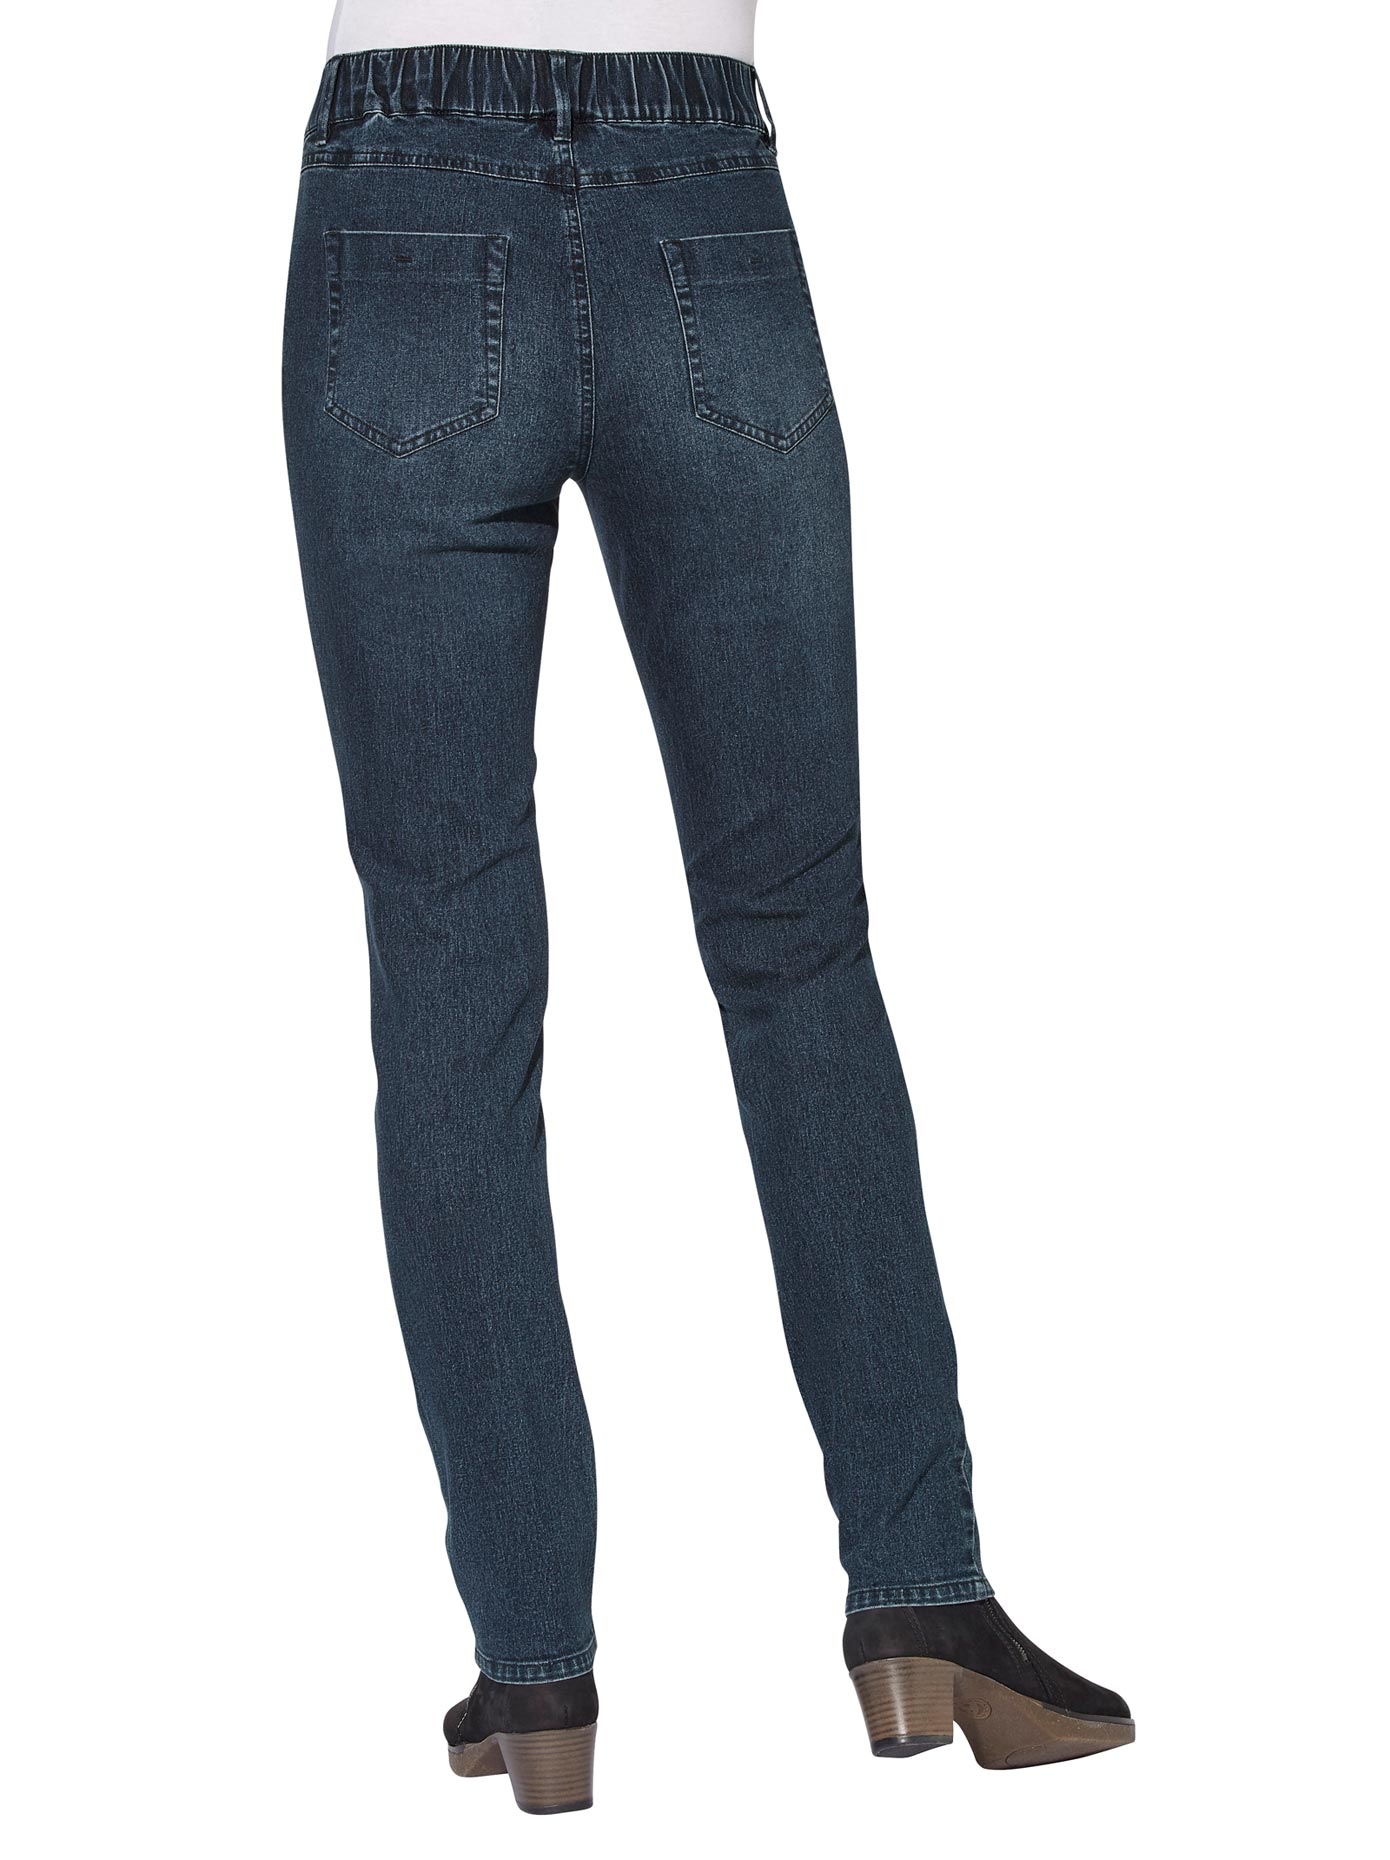 bei Schlupfjeans, Looks tlg.) Casual ♕ (1